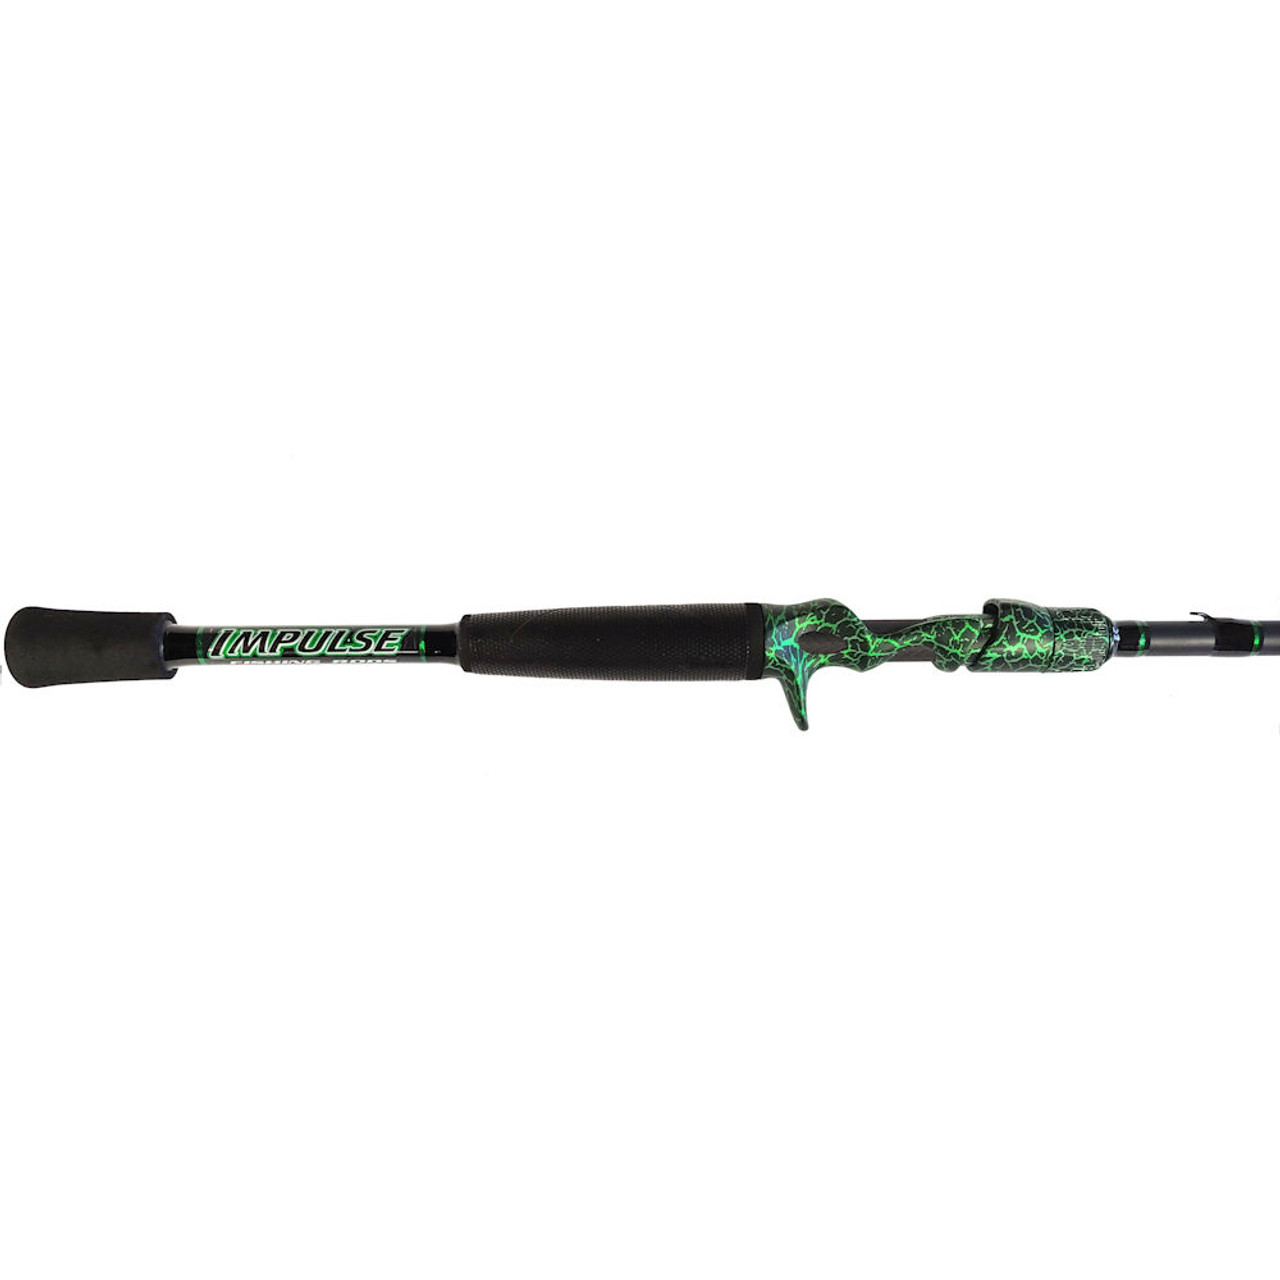 Berkley Amp Fishing Rod Review, Saltwater And Fresh Spinning Rods